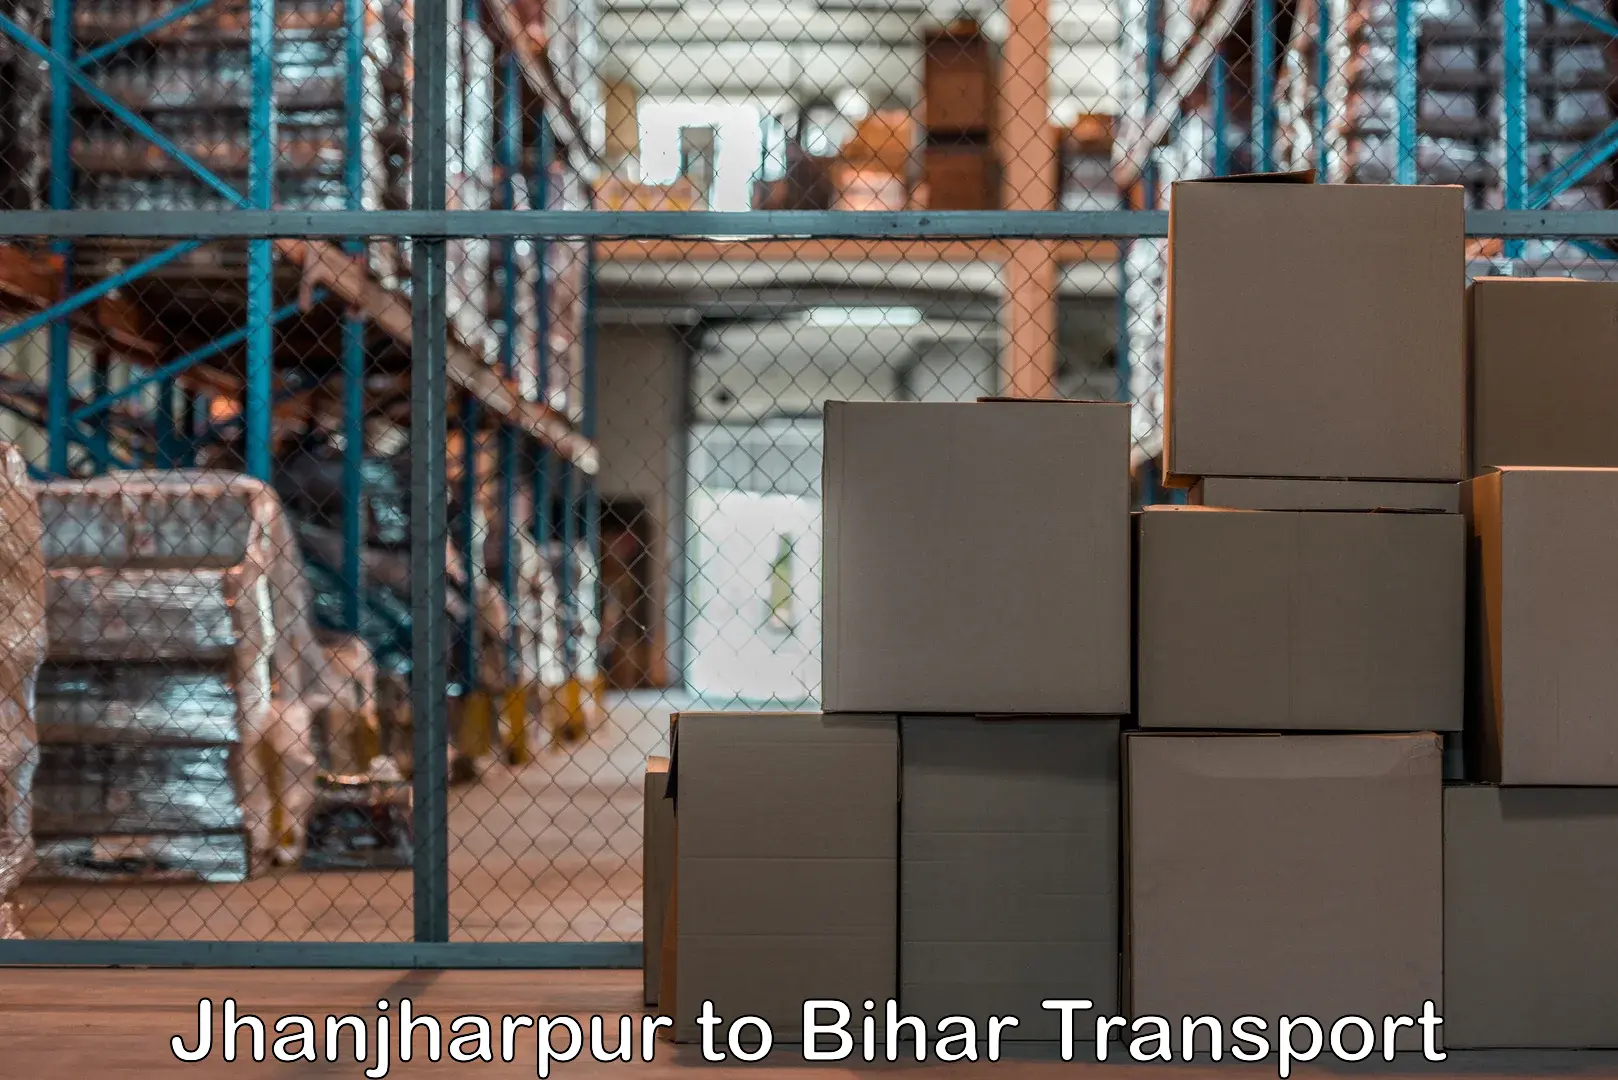 Air freight transport services in Jhanjharpur to Kaluahi